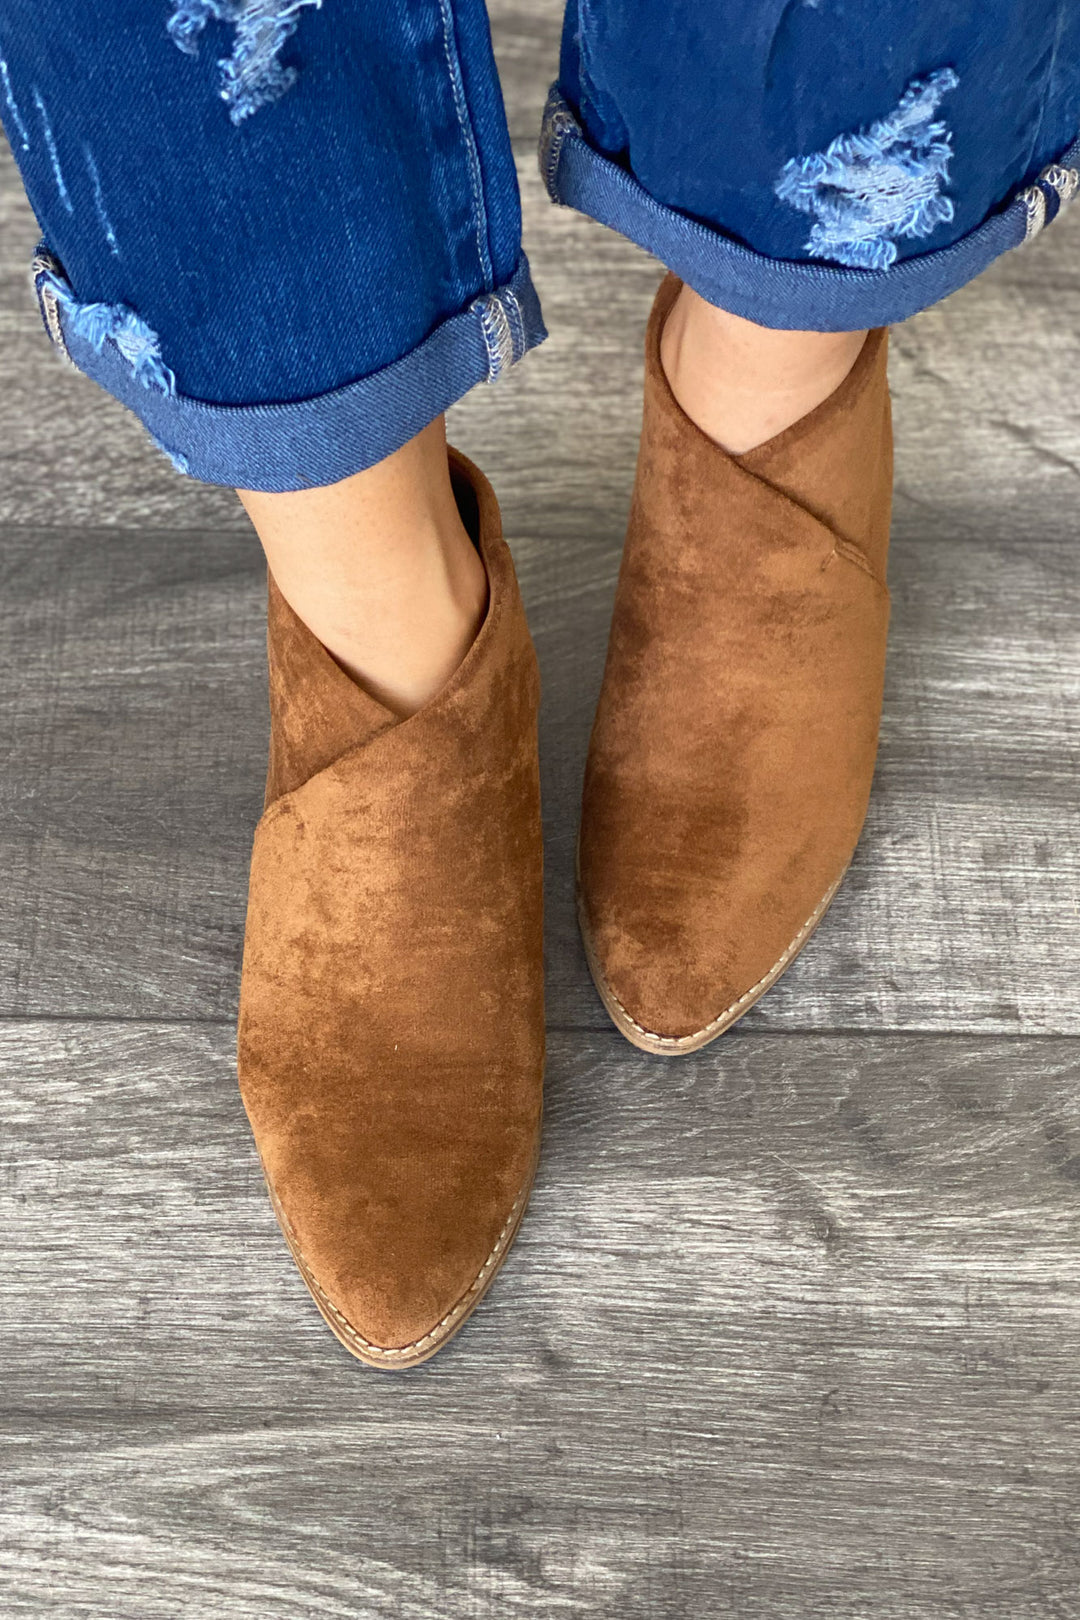 Nelson Booties: Camel - ShopSpoiled